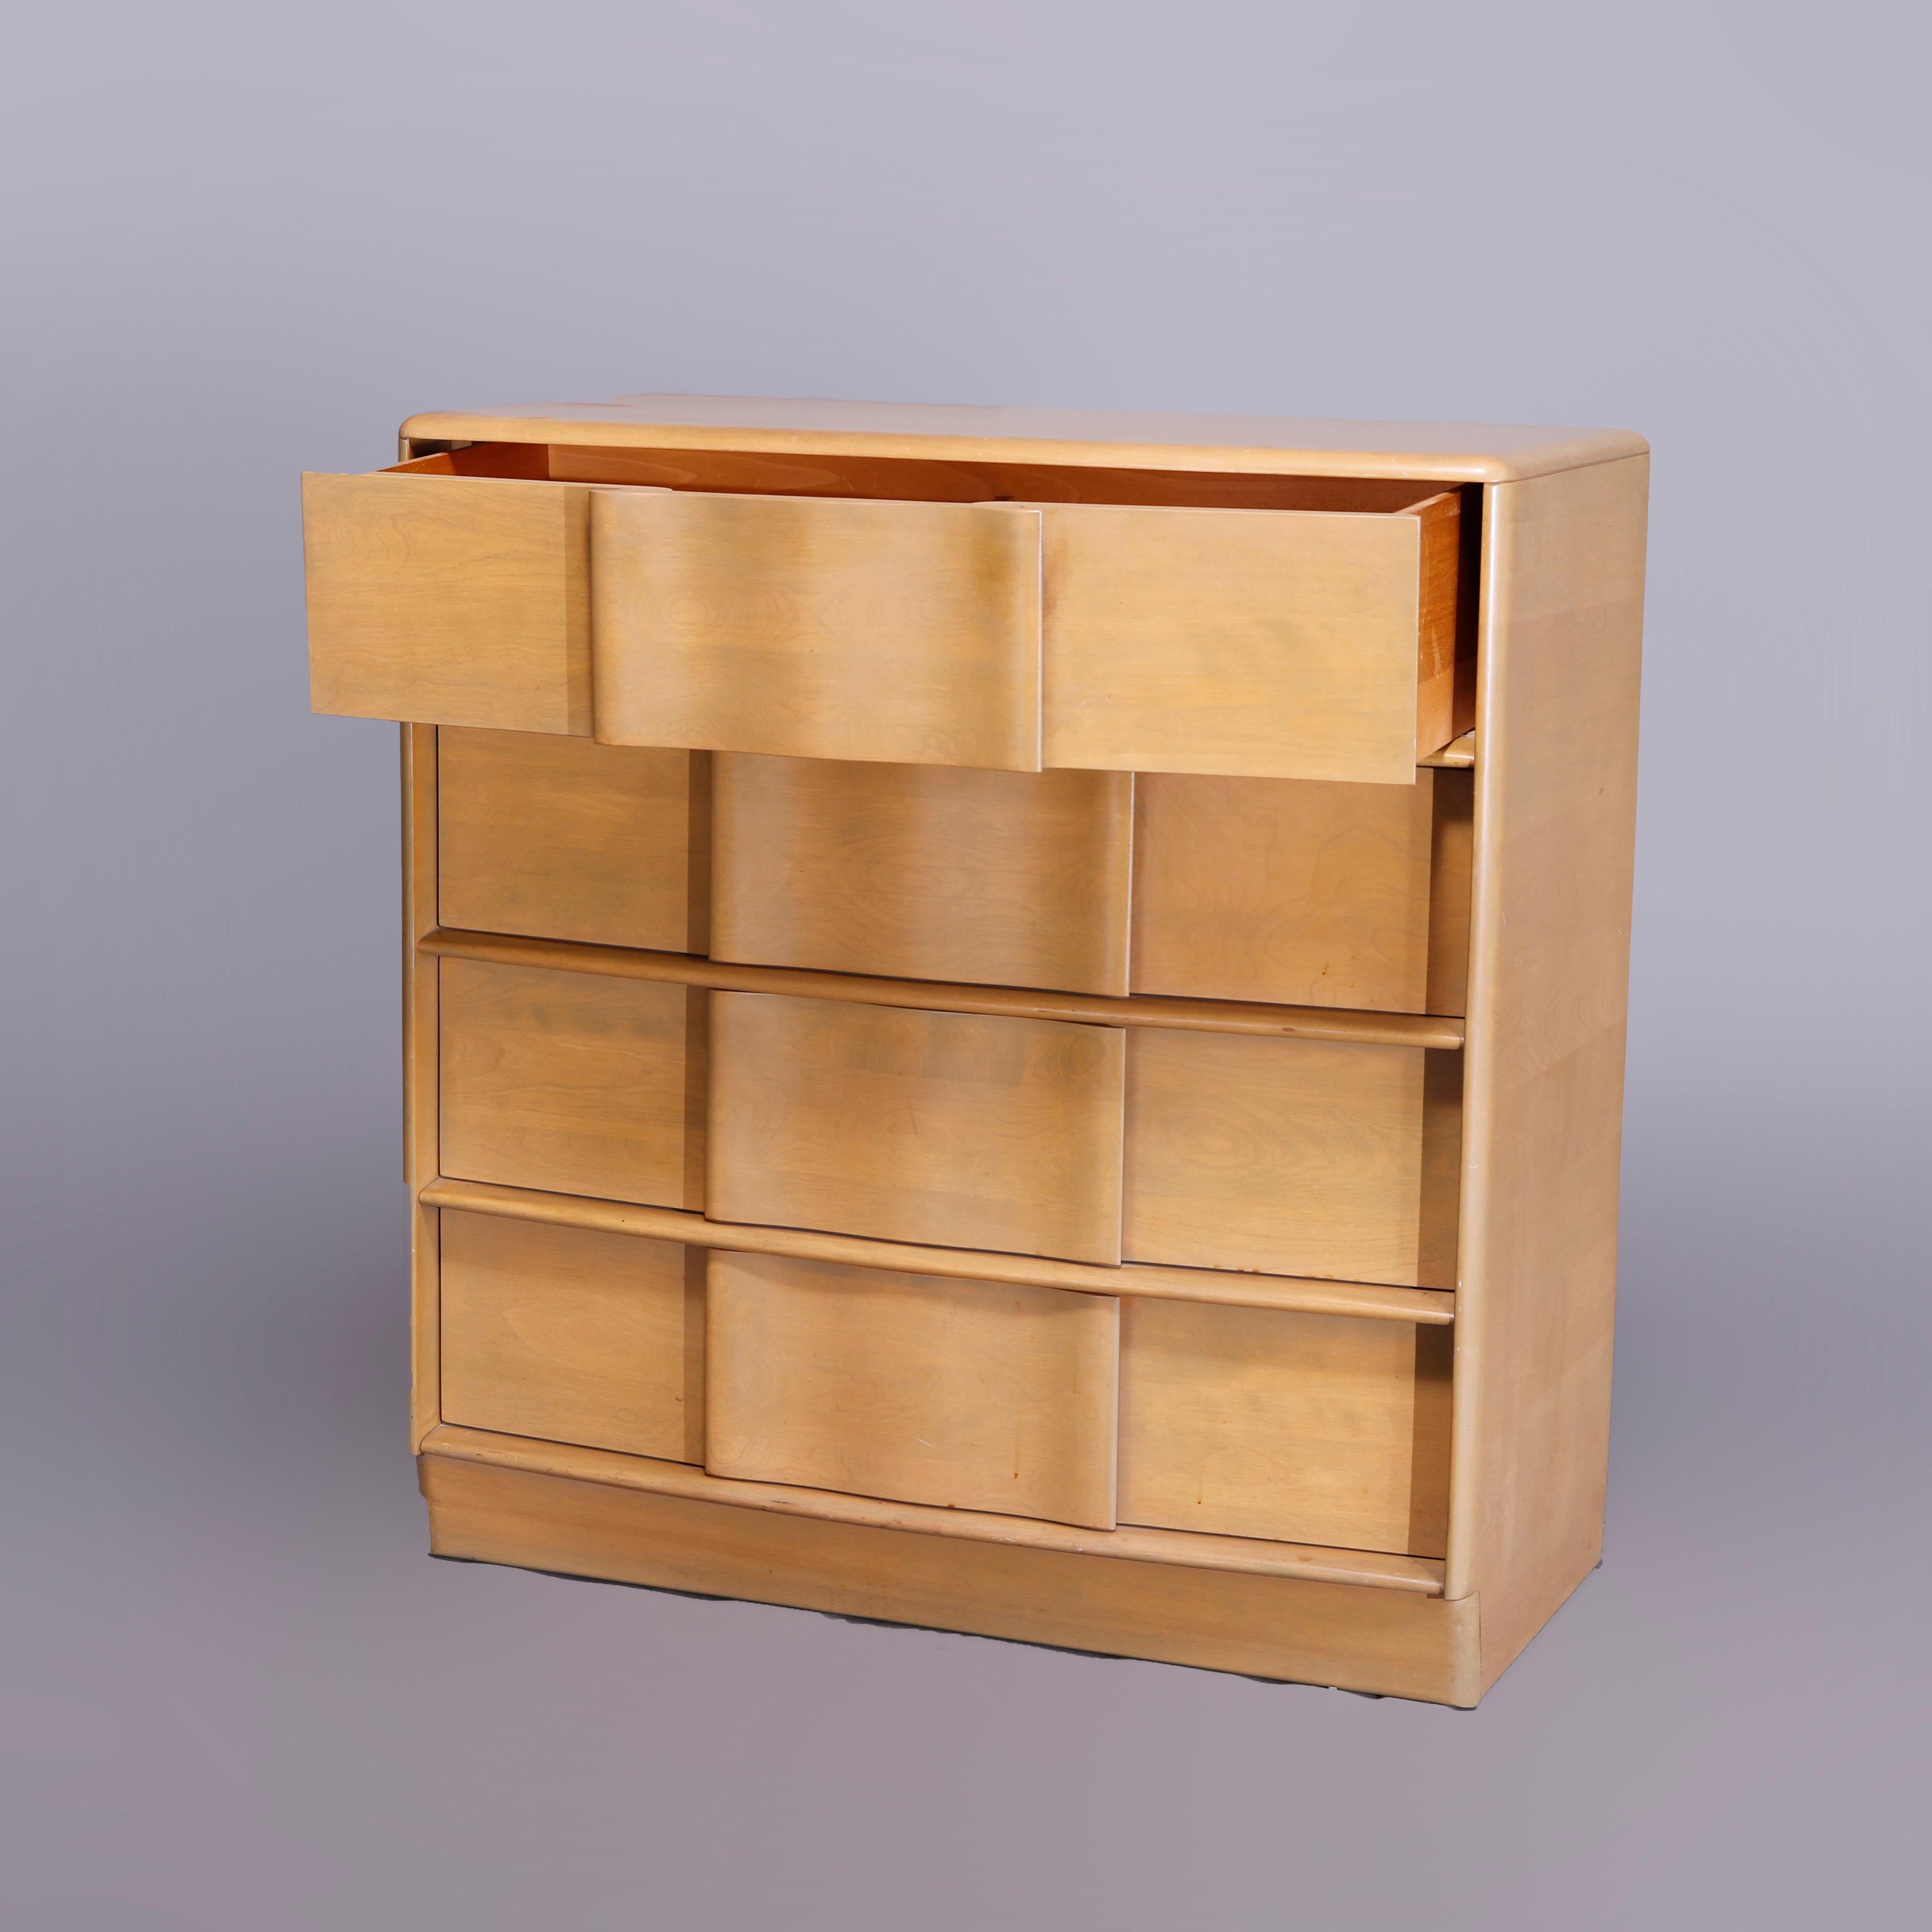 A Mid-Century Modern Heywood Wakefield high boy dresser in the Sculptura pattern offers birch construction with case having four long drawers, platinum finish, en verso maker mark as photographed, c1950

Measures- 40'' H x 38'' W x 19.25'' D.